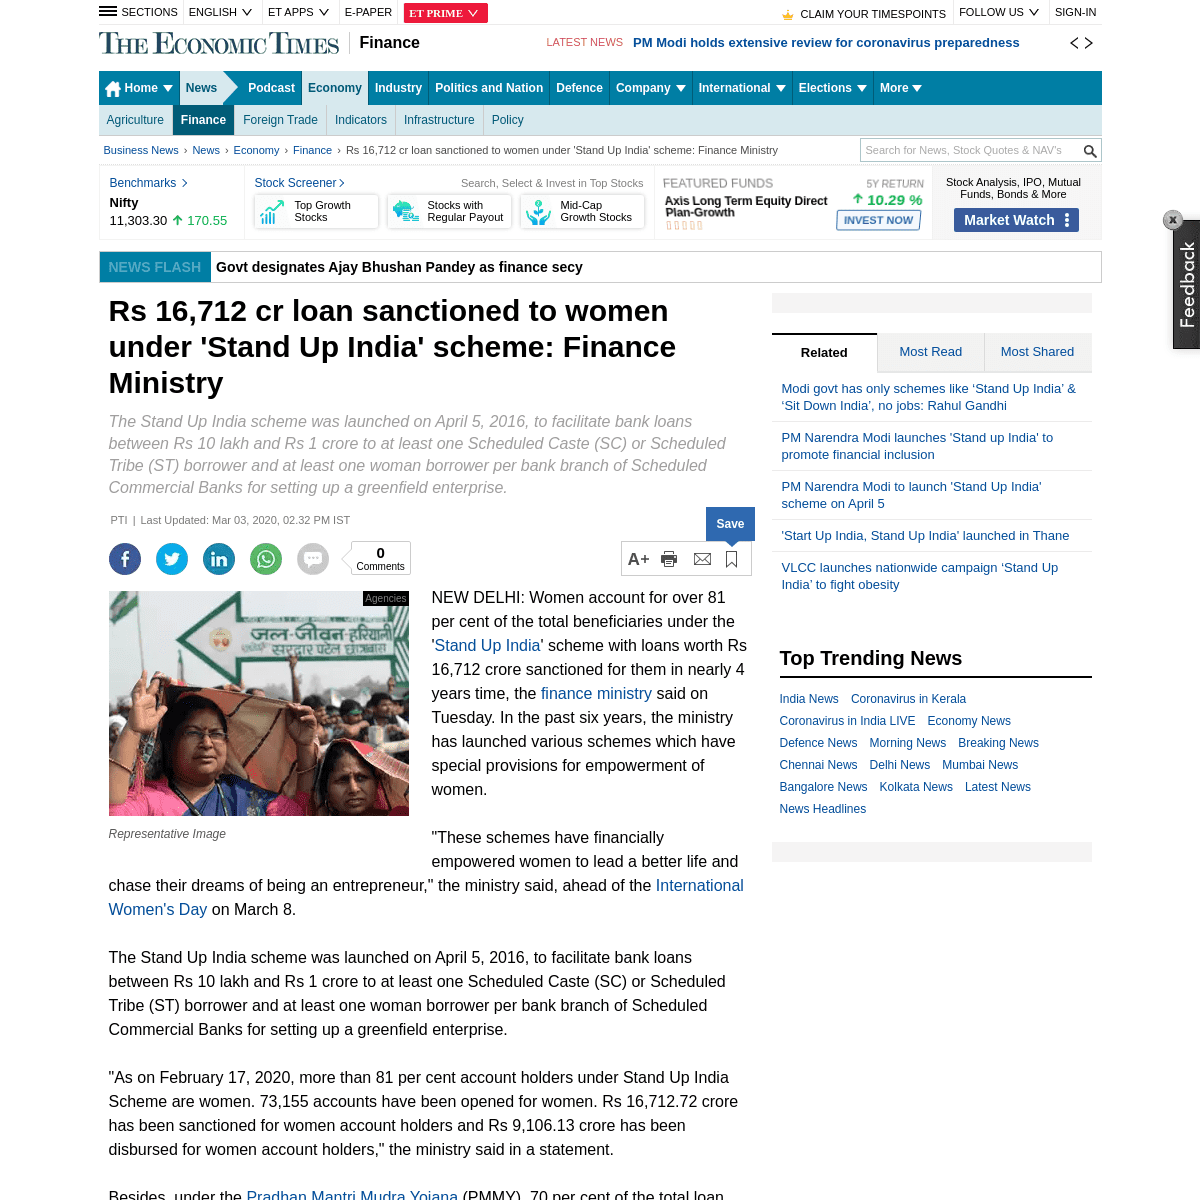 A complete backup of economictimes.indiatimes.com/news/economy/finance/rs-16712-cr-loan-sanctioned-to-women-under-stand-up-india